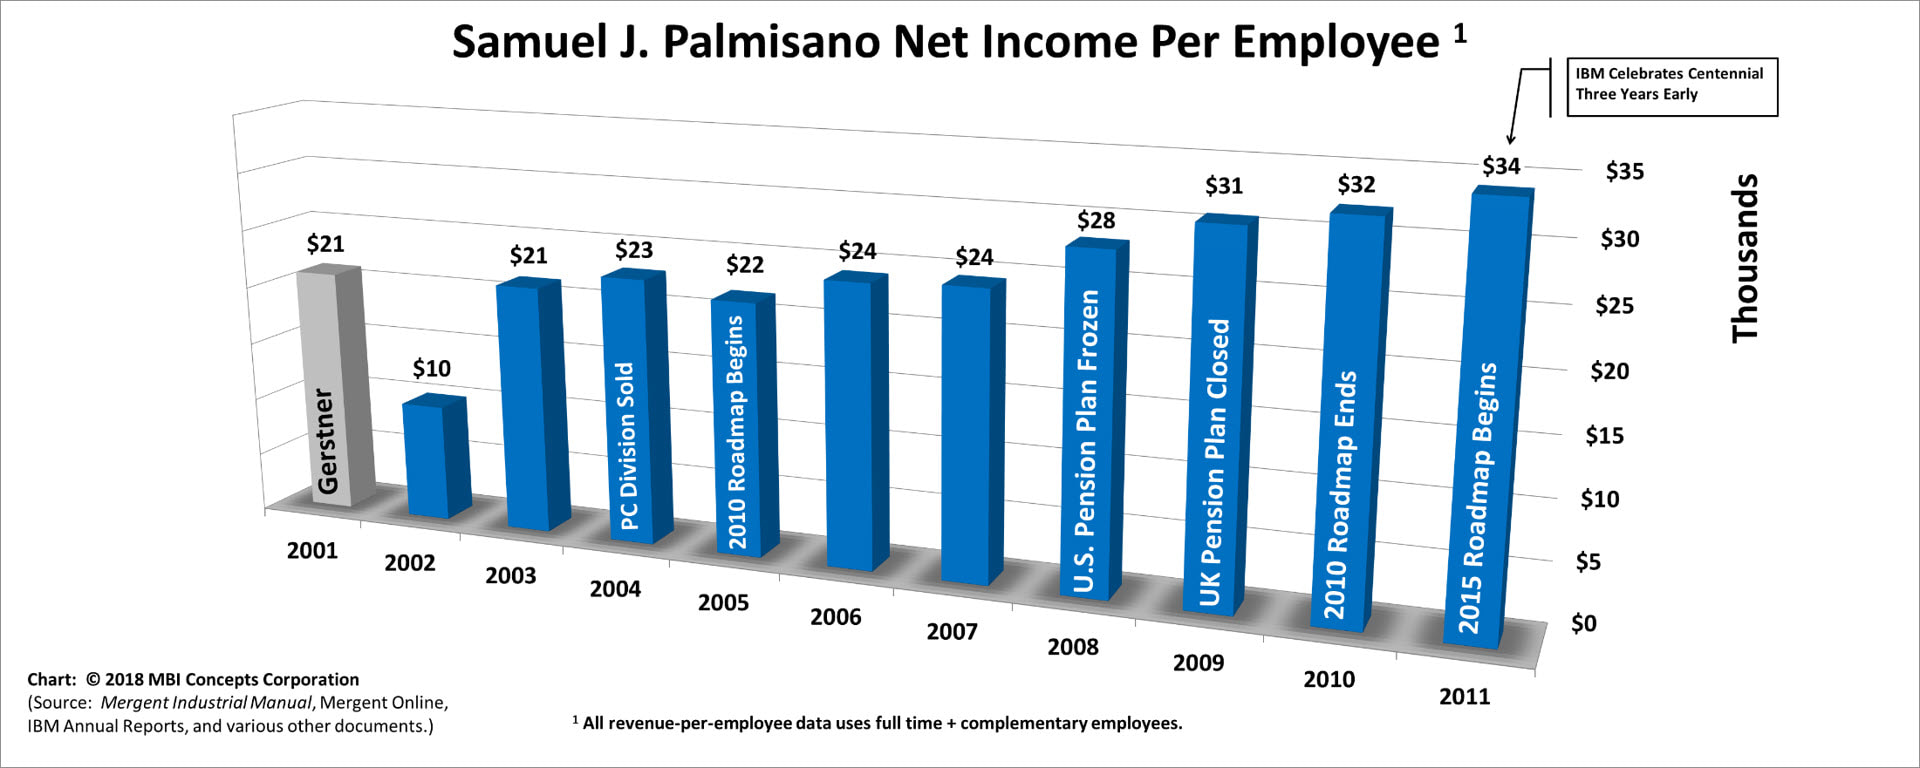 A color bar chart showing IBM's yearly net income (profit) per employee from 2001 to 2011 for IBM Chief Executive Officer Samuel J. (Sam) Palmisano.